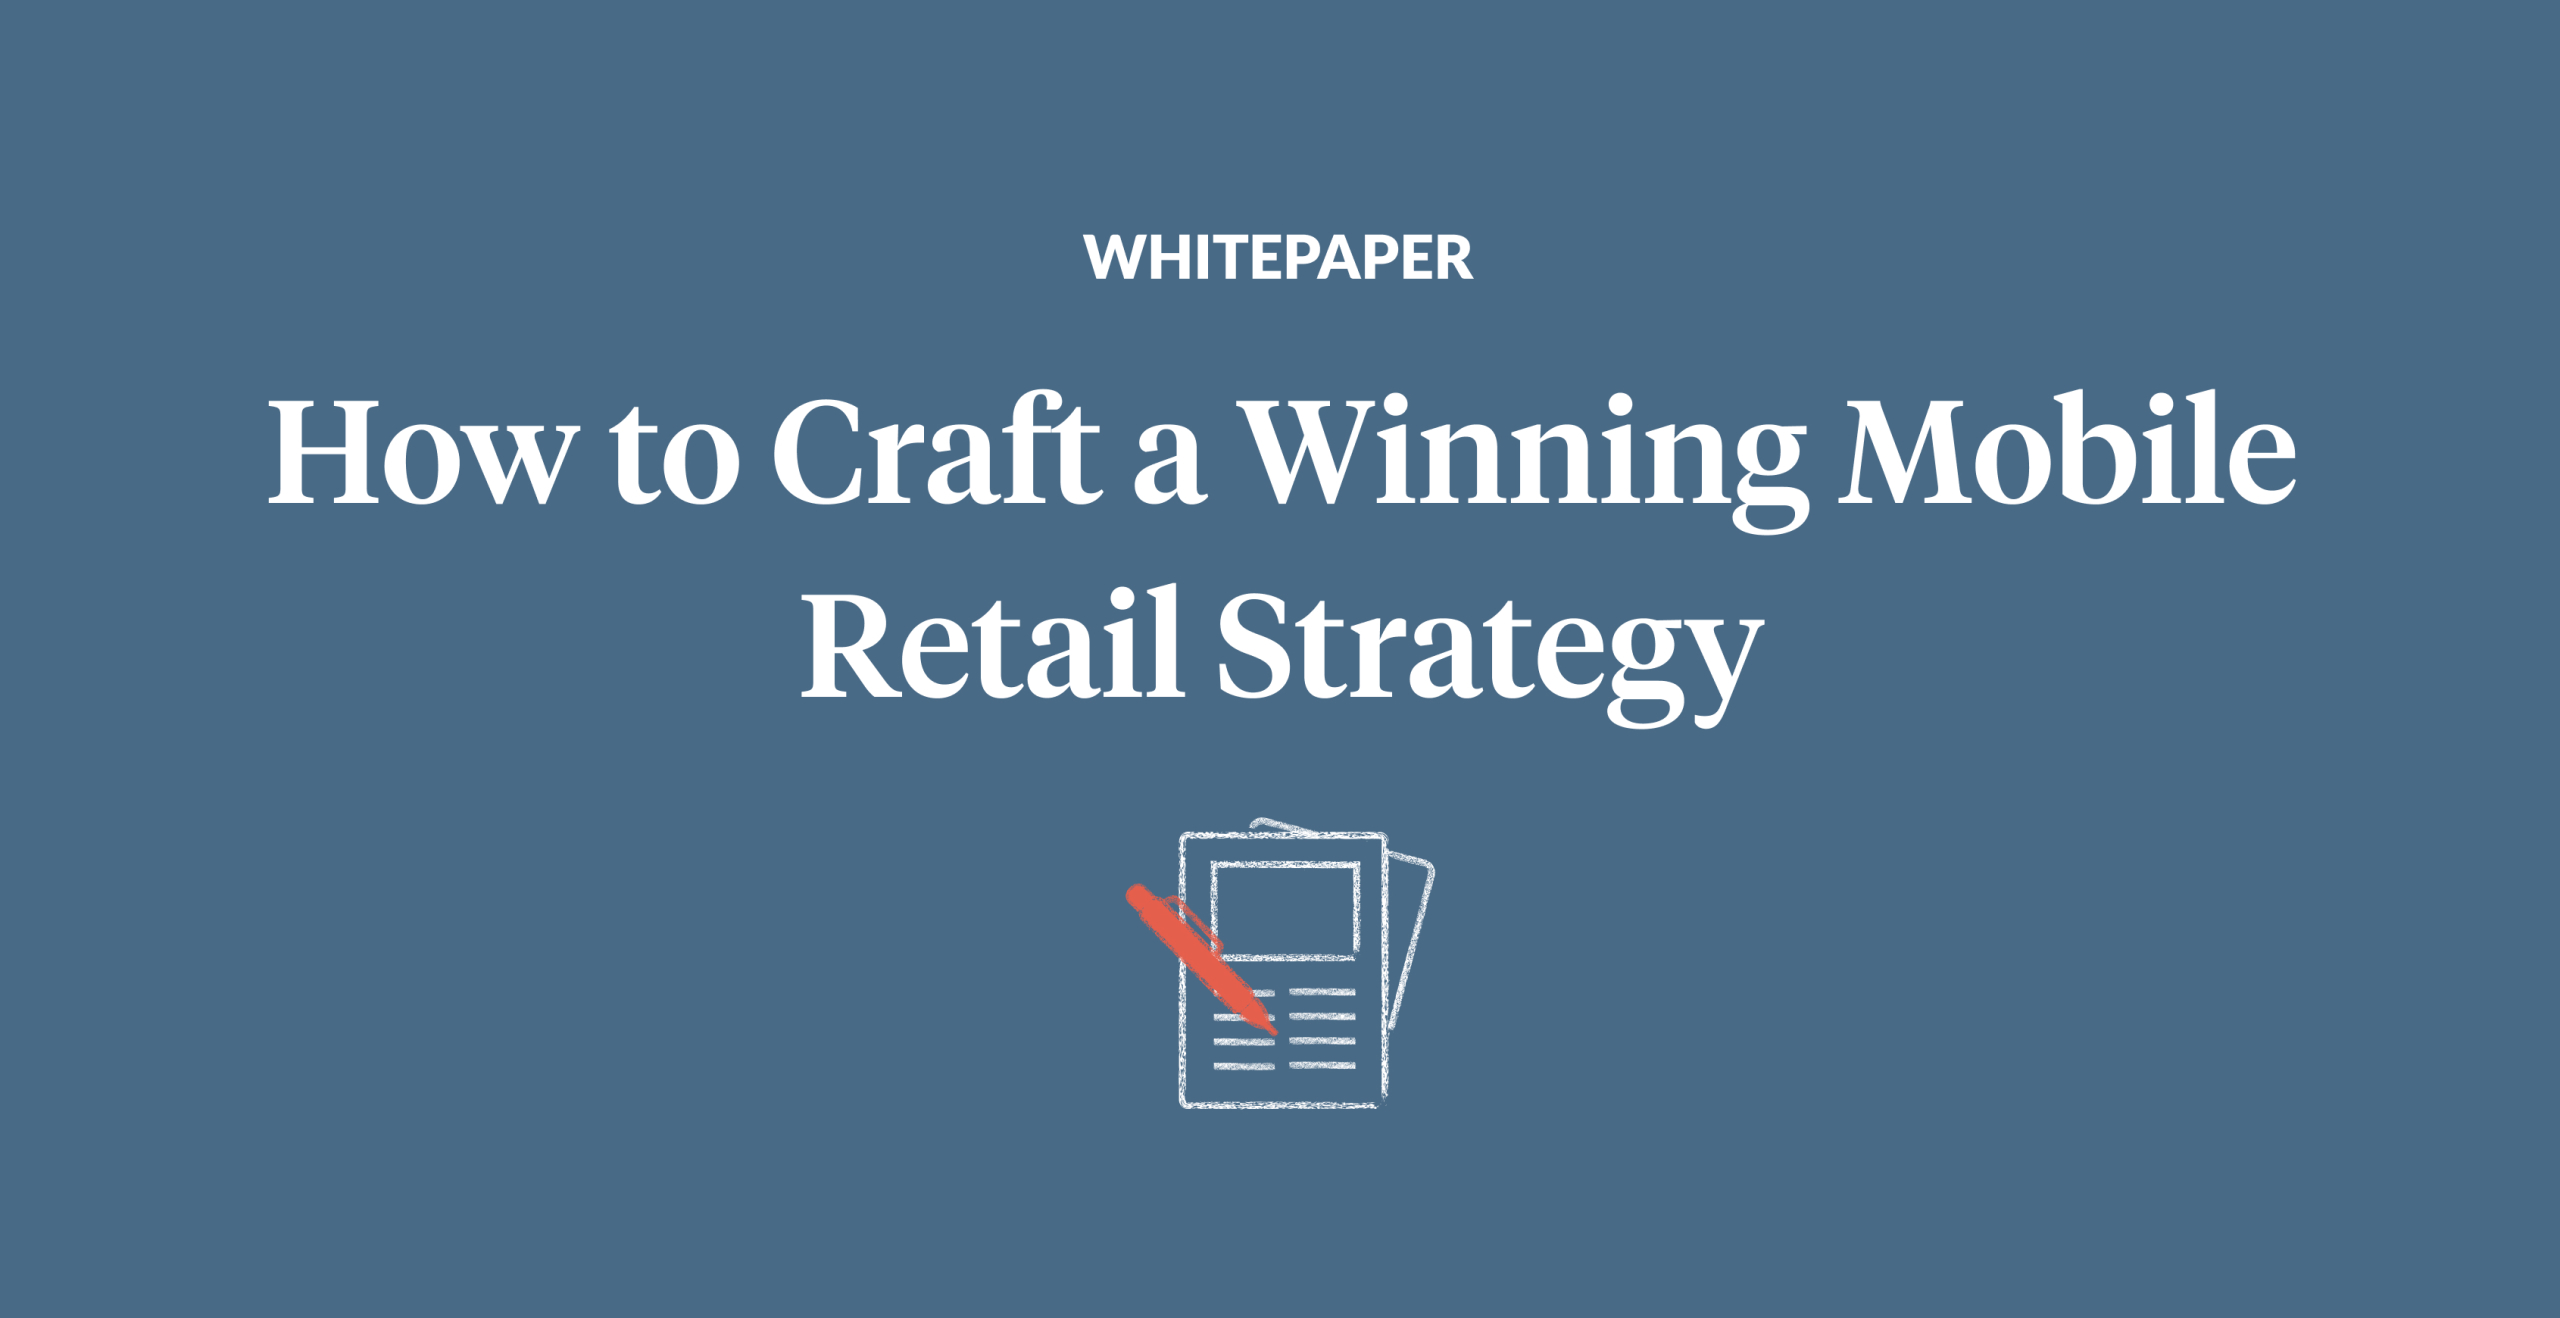 How to Craft a Winning Mobile Retail Strategy